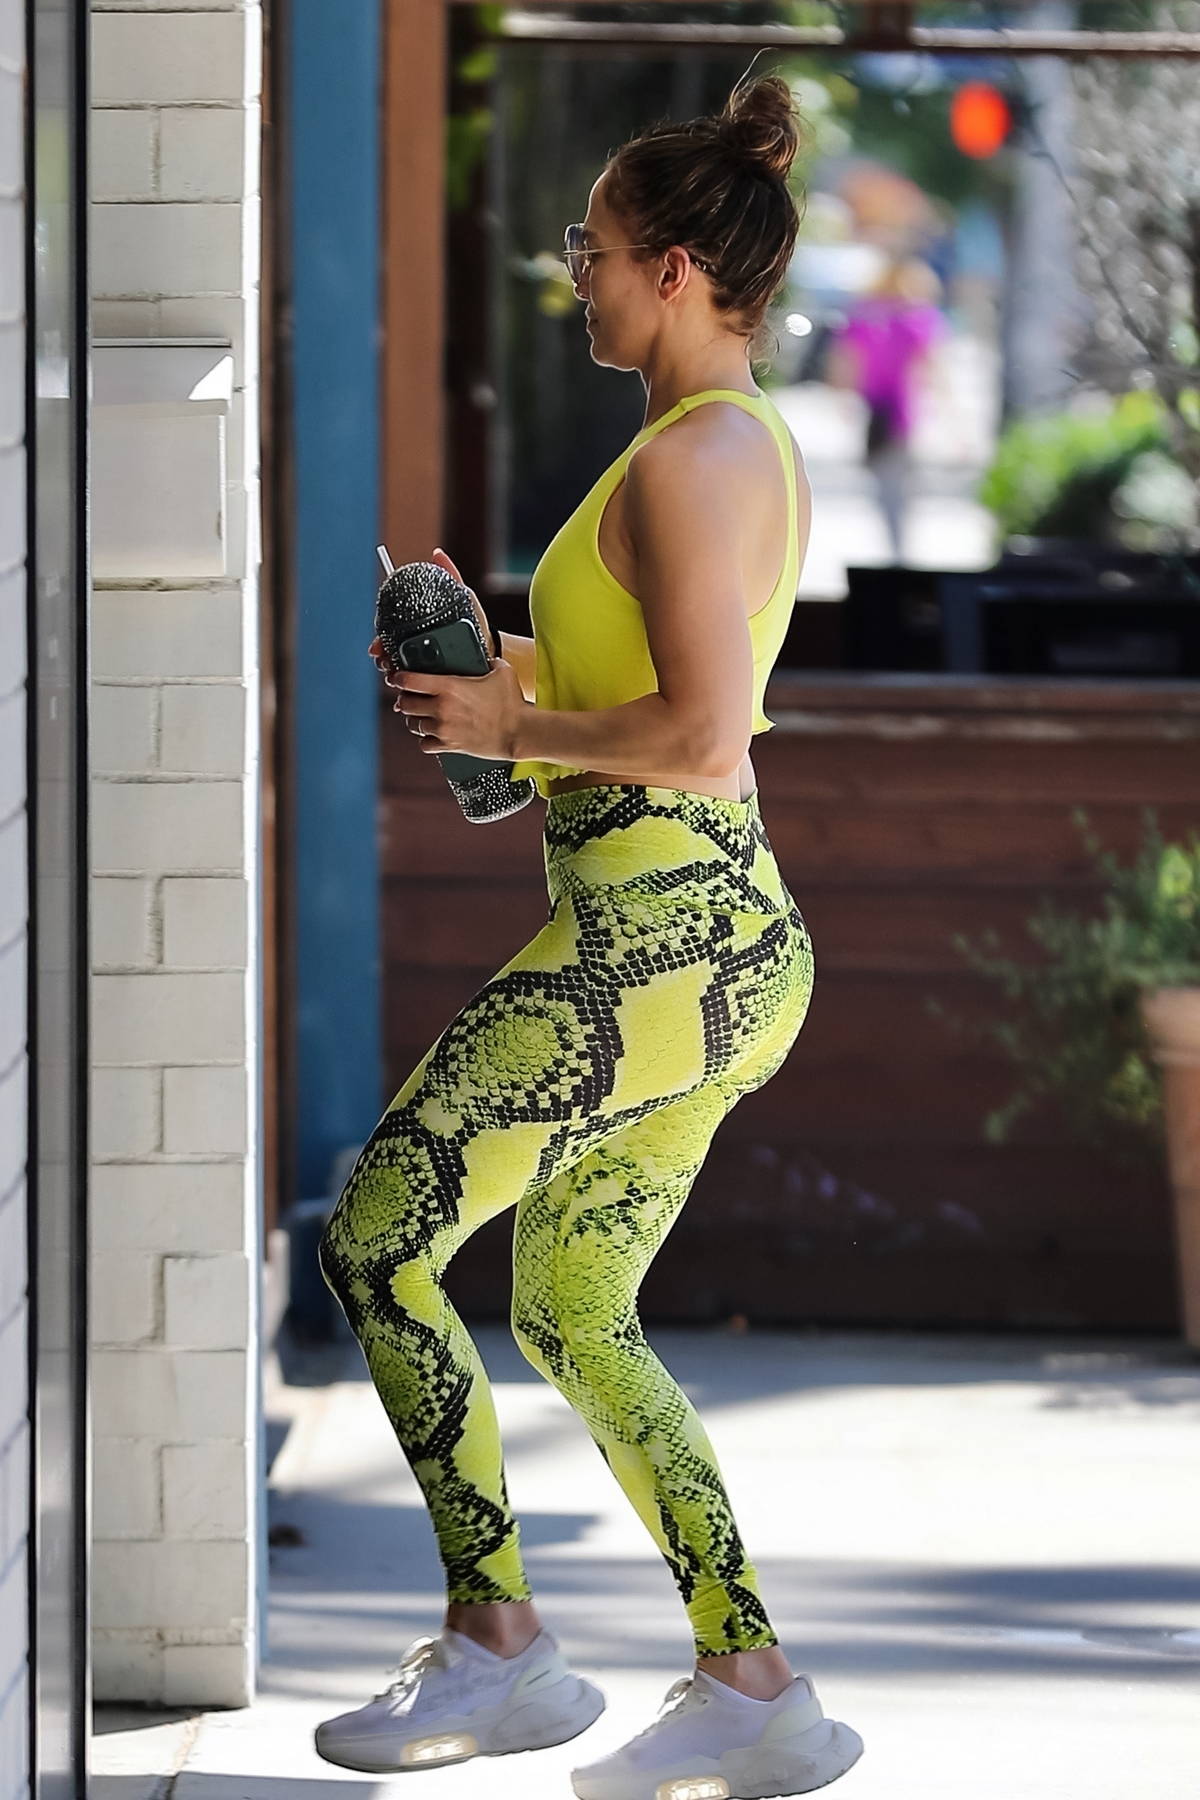 Jennifer Lopez goes makeup free as she hits the gym sporting snakeskin print leggings and yellow tank top in Studio City California 190723 6